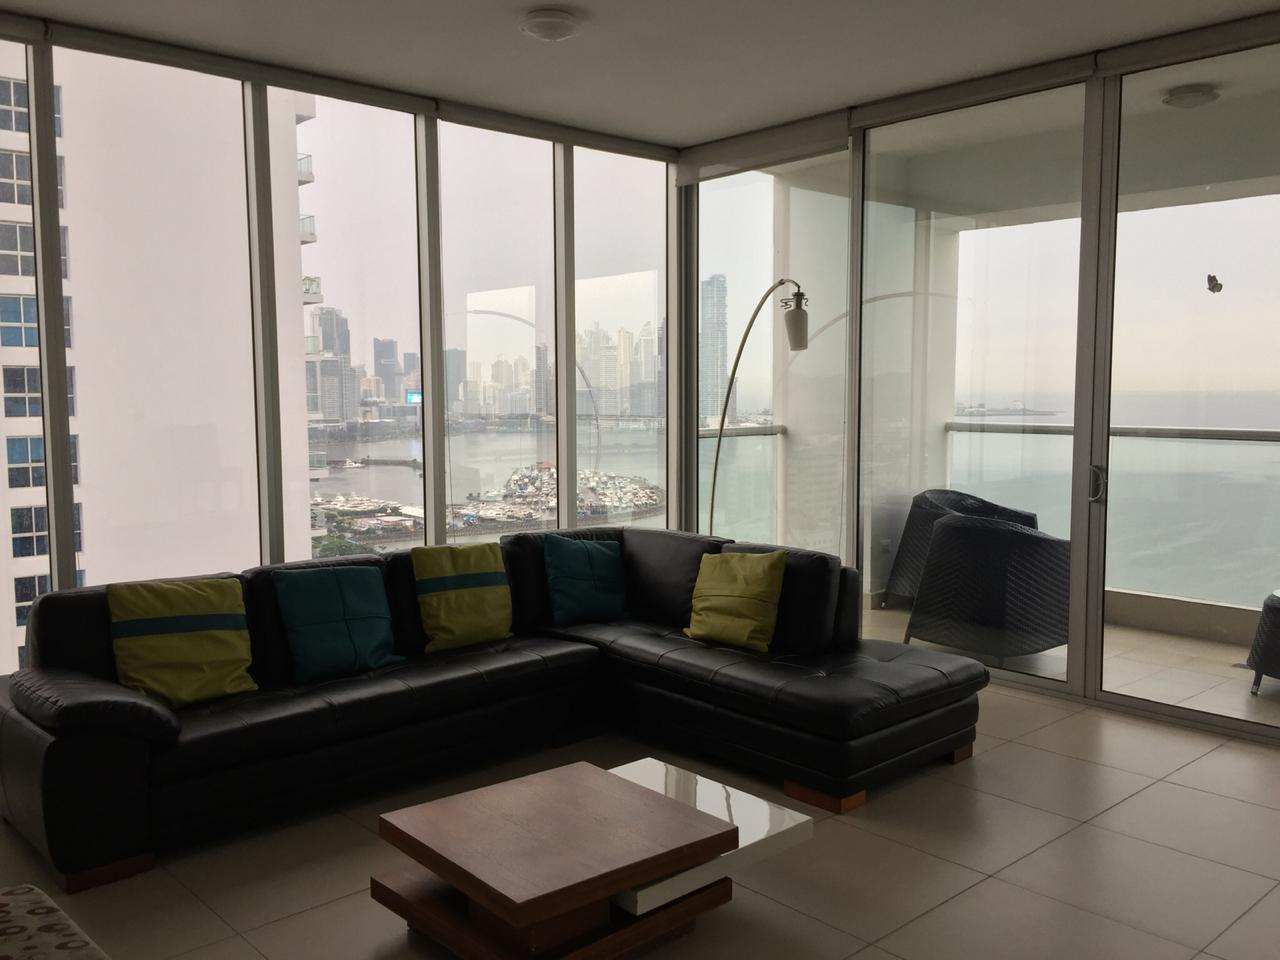 For Rent In PH Rivage Located In Balboa Avenue - Panama Sol Realty